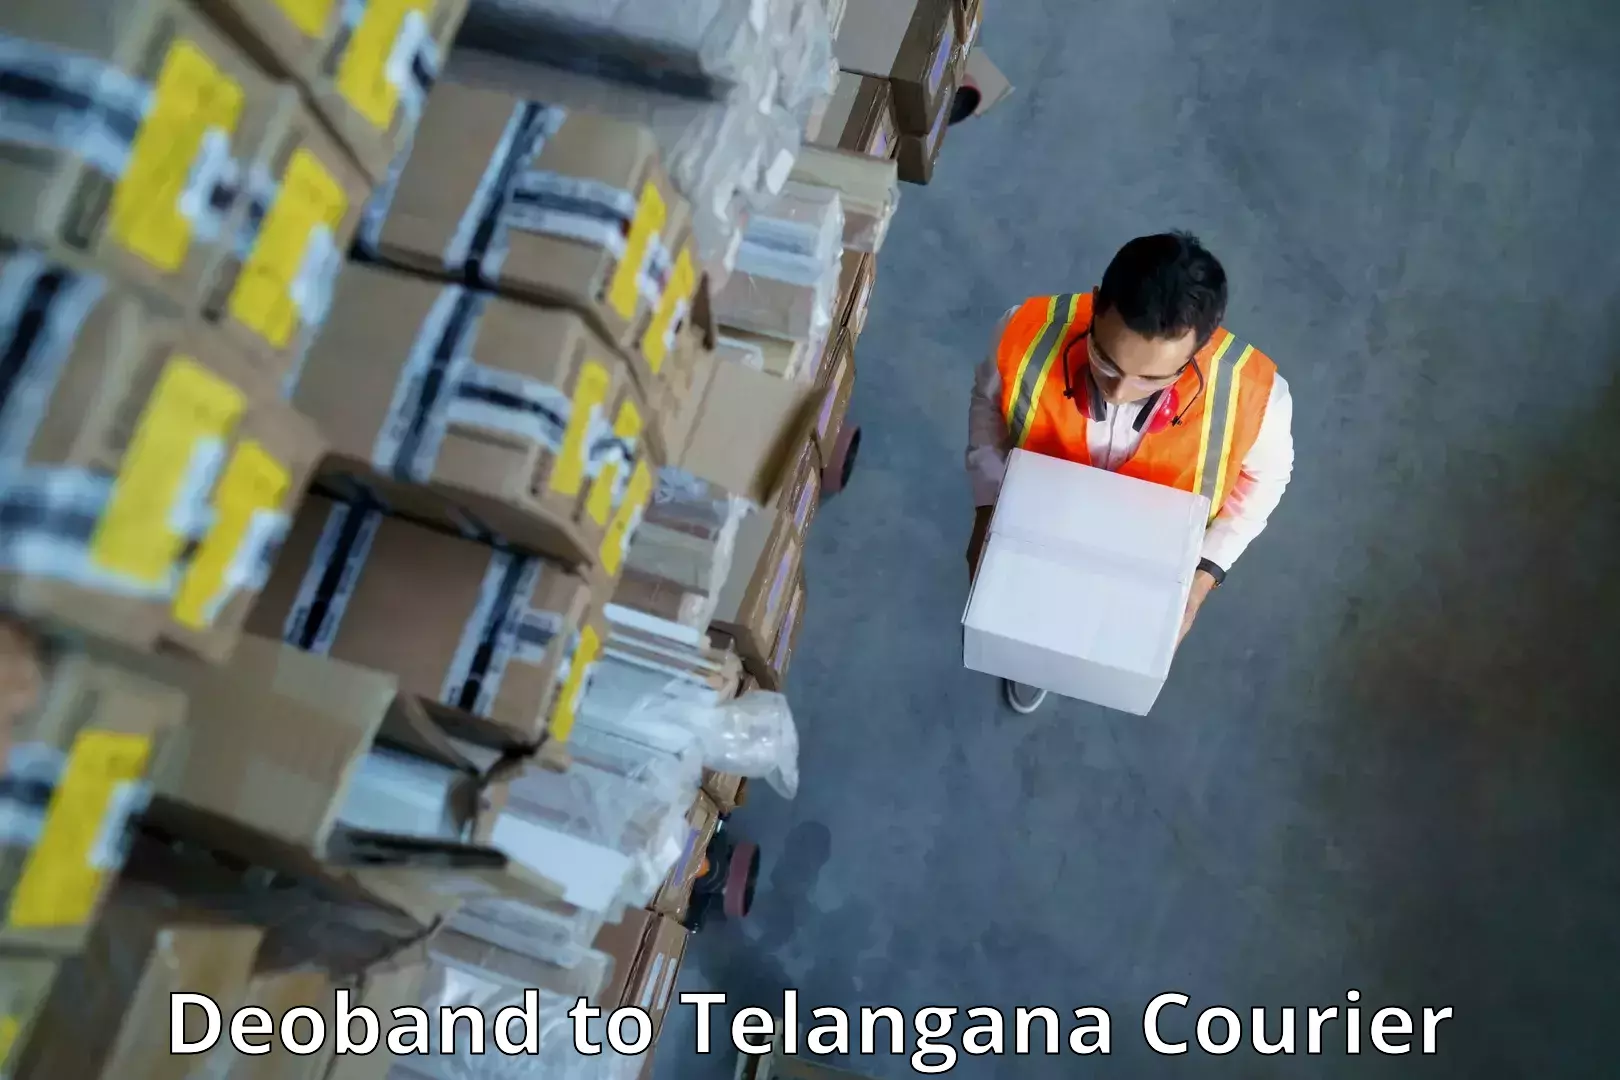 International courier networks Deoband to Secunderabad